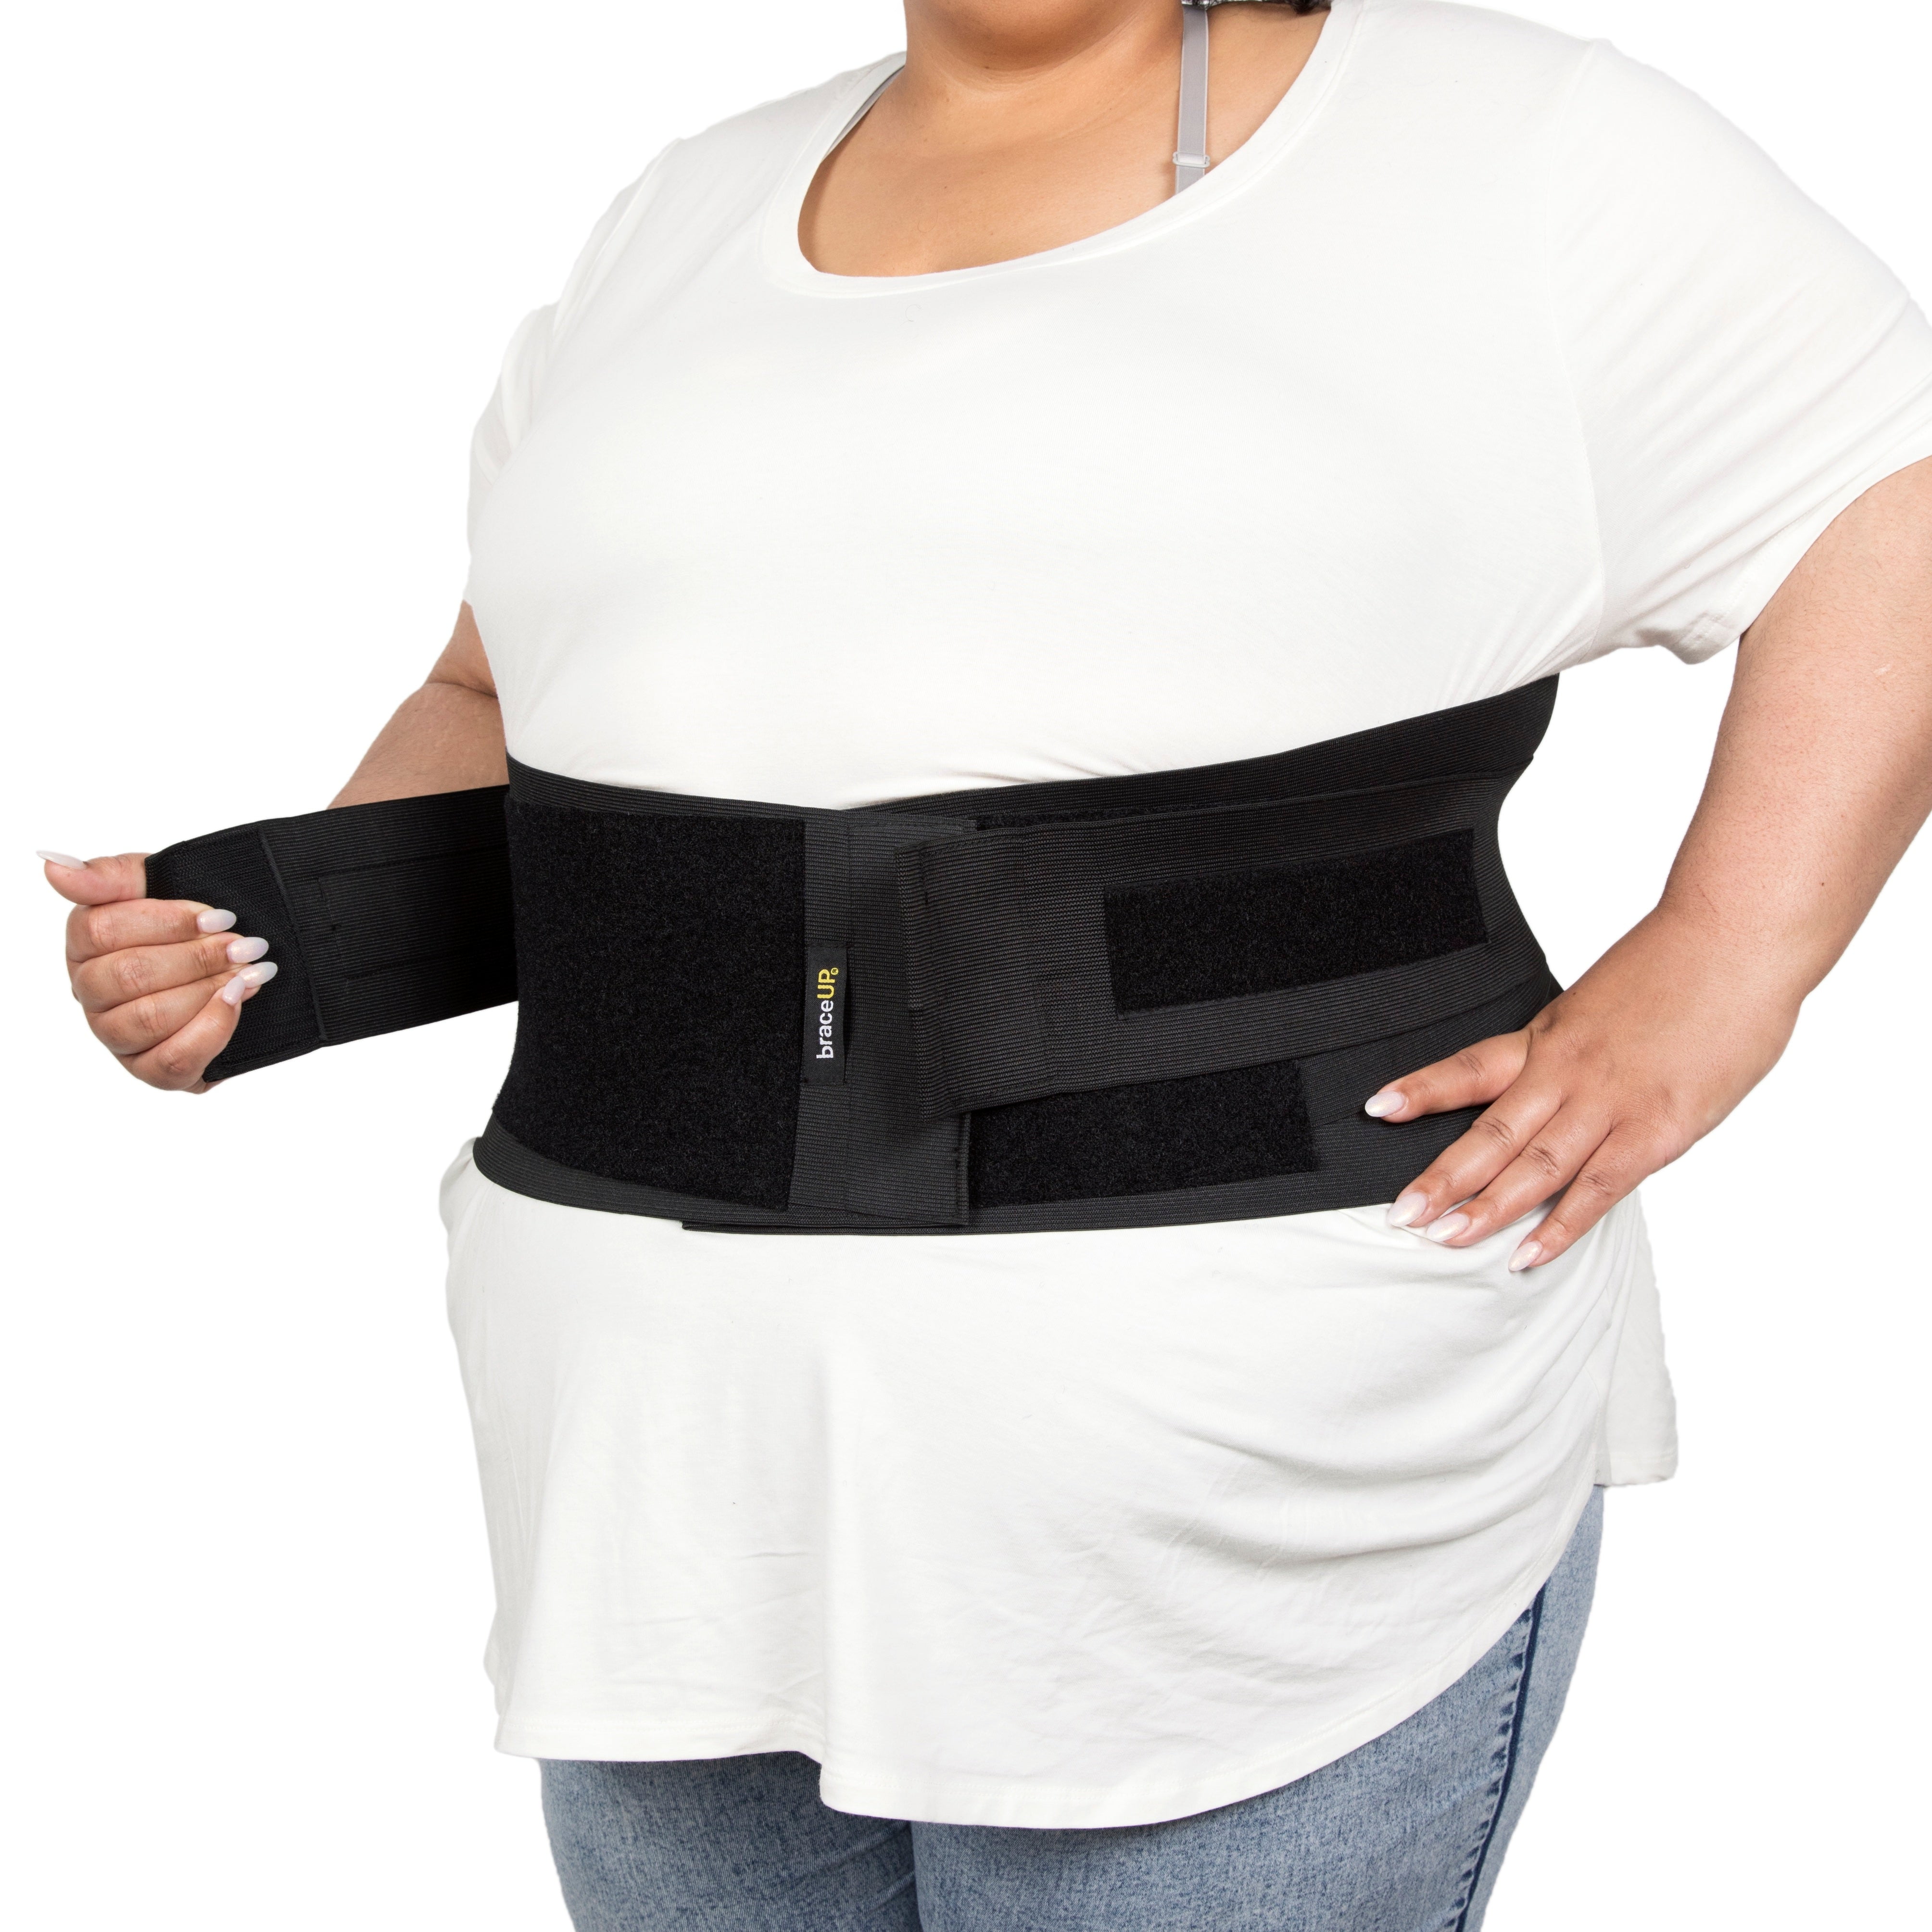 AltroCare 4 Panel, 12 high, Plus Size Post Surgery Abdominal Binder, Fits  30 to 45 Waist